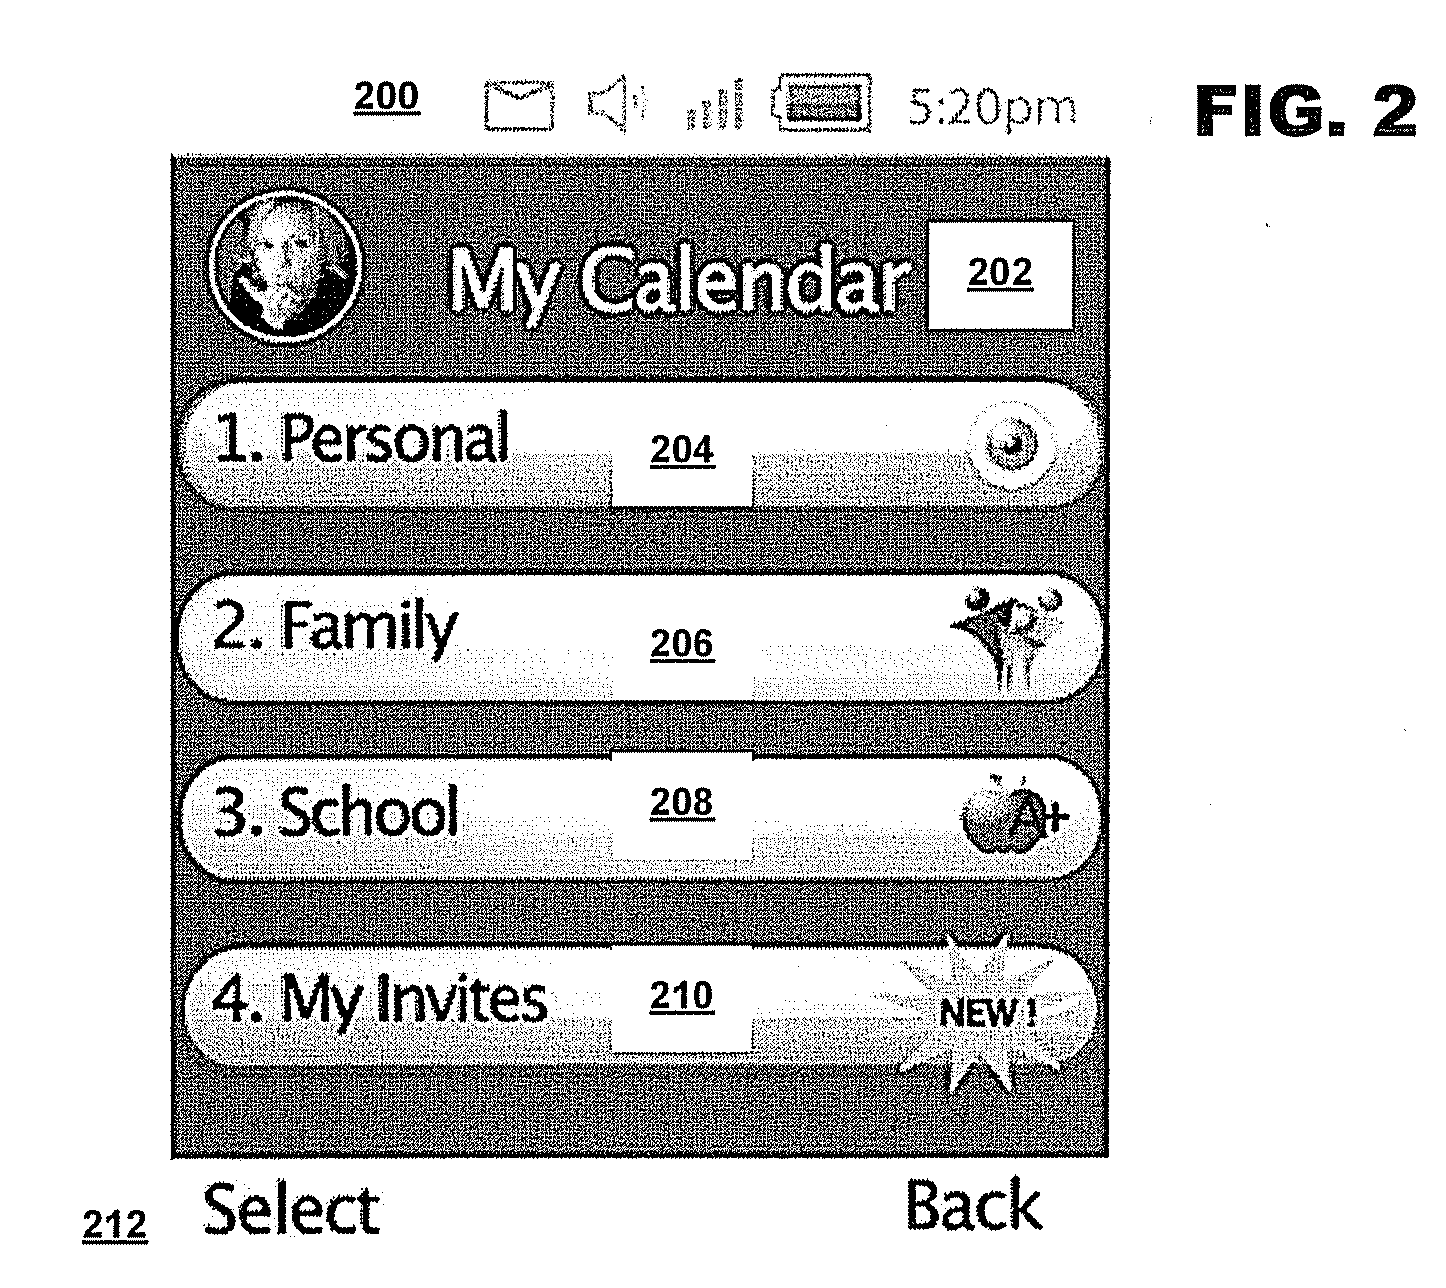 Method and system for synchronization and display of a plurality of calendars on a device